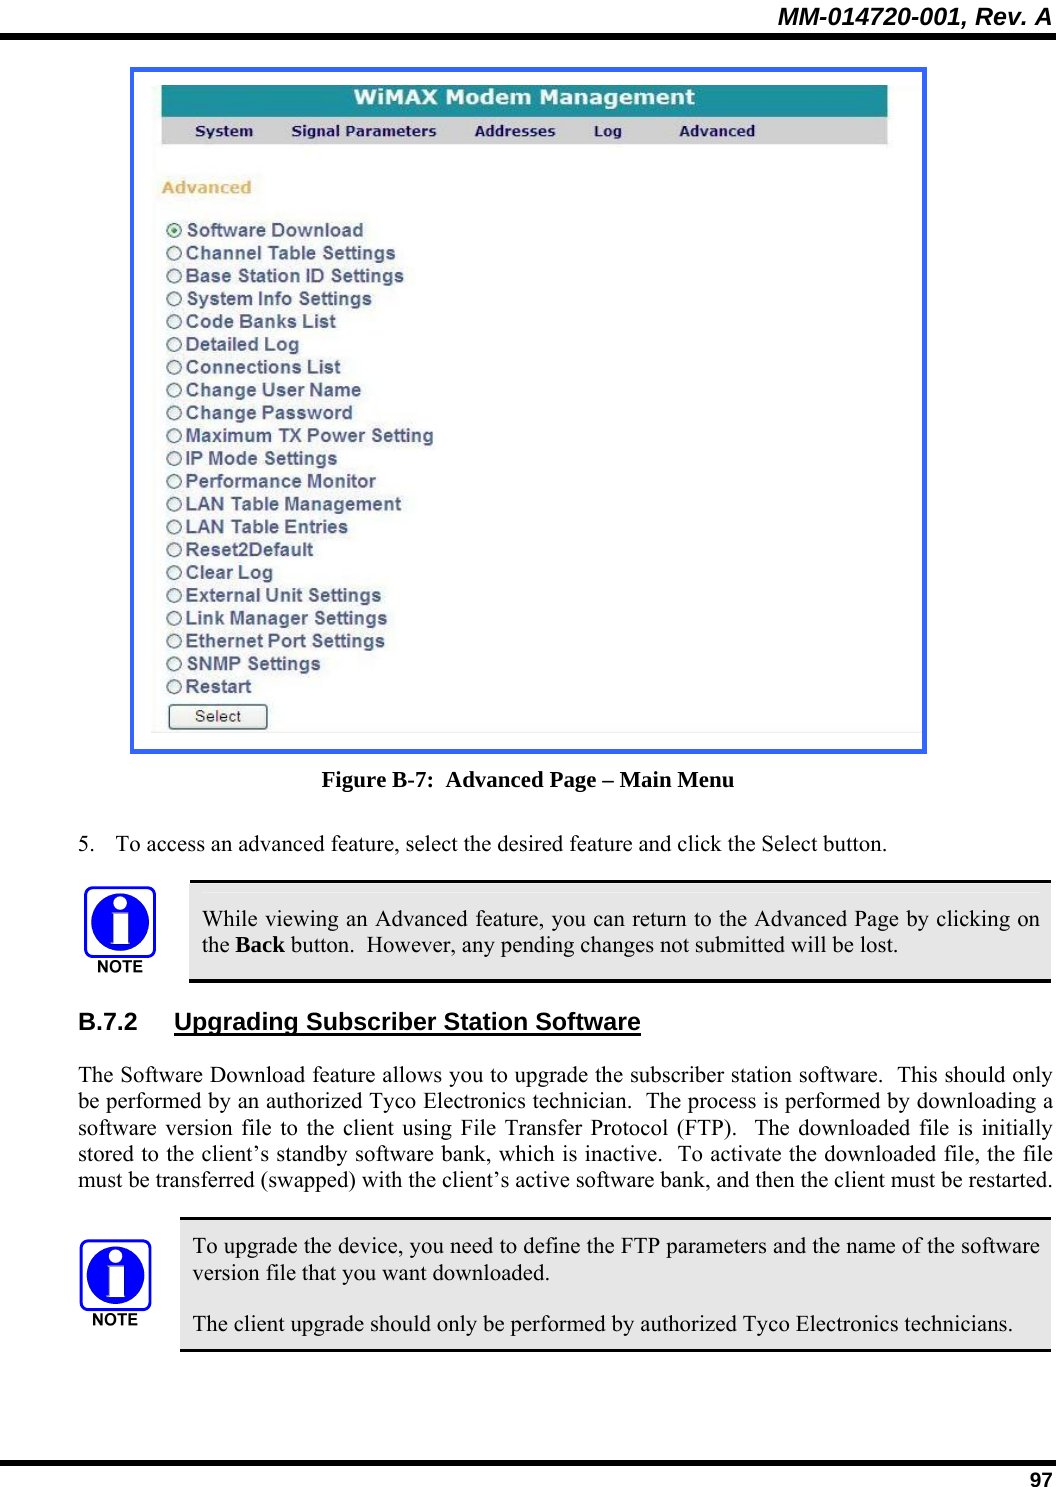 MM-014720-001, Rev. A  97  Figure B-7:  Advanced Page – Main Menu 5. To access an advanced feature, select the desired feature and click the Select button.   While viewing an Advanced feature, you can return to the Advanced Page by clicking on the Back button.  However, any pending changes not submitted will be lost. B.7.2  Upgrading Subscriber Station Software The Software Download feature allows you to upgrade the subscriber station software.  This should only be performed by an authorized Tyco Electronics technician.  The process is performed by downloading a software version file to the client using File Transfer Protocol (FTP).  The downloaded file is initially stored to the client’s standby software bank, which is inactive.  To activate the downloaded file, the file must be transferred (swapped) with the client’s active software bank, and then the client must be restarted.   To upgrade the device, you need to define the FTP parameters and the name of the software version file that you want downloaded. The client upgrade should only be performed by authorized Tyco Electronics technicians. 